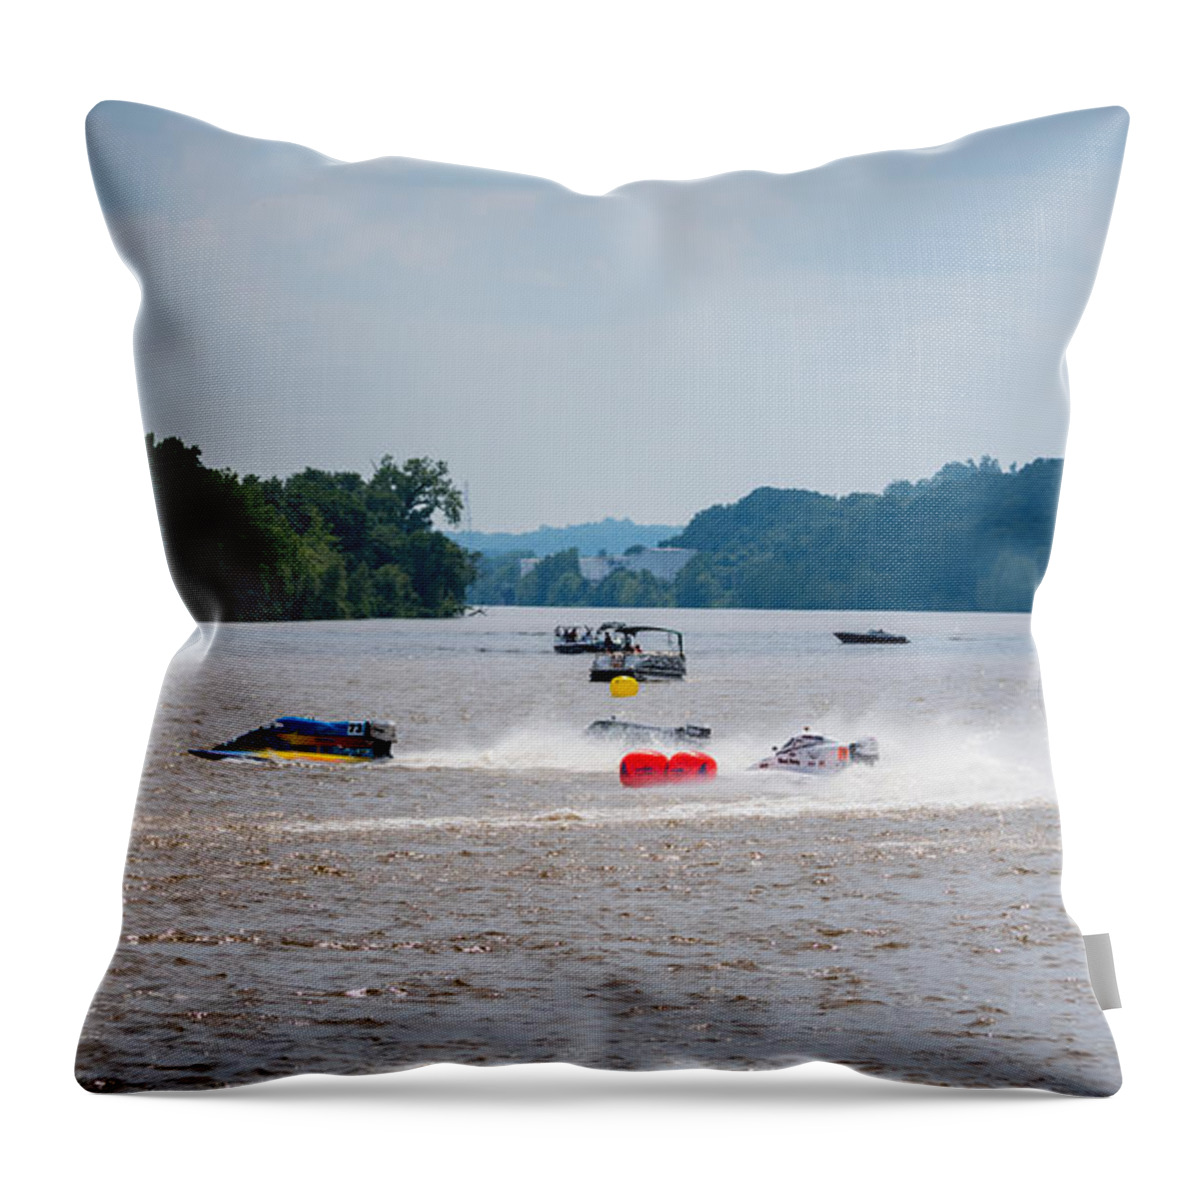 Riverfront Roar Throw Pillow featuring the photograph Riverfront Roar- Taking The Turn by Holden The Moment